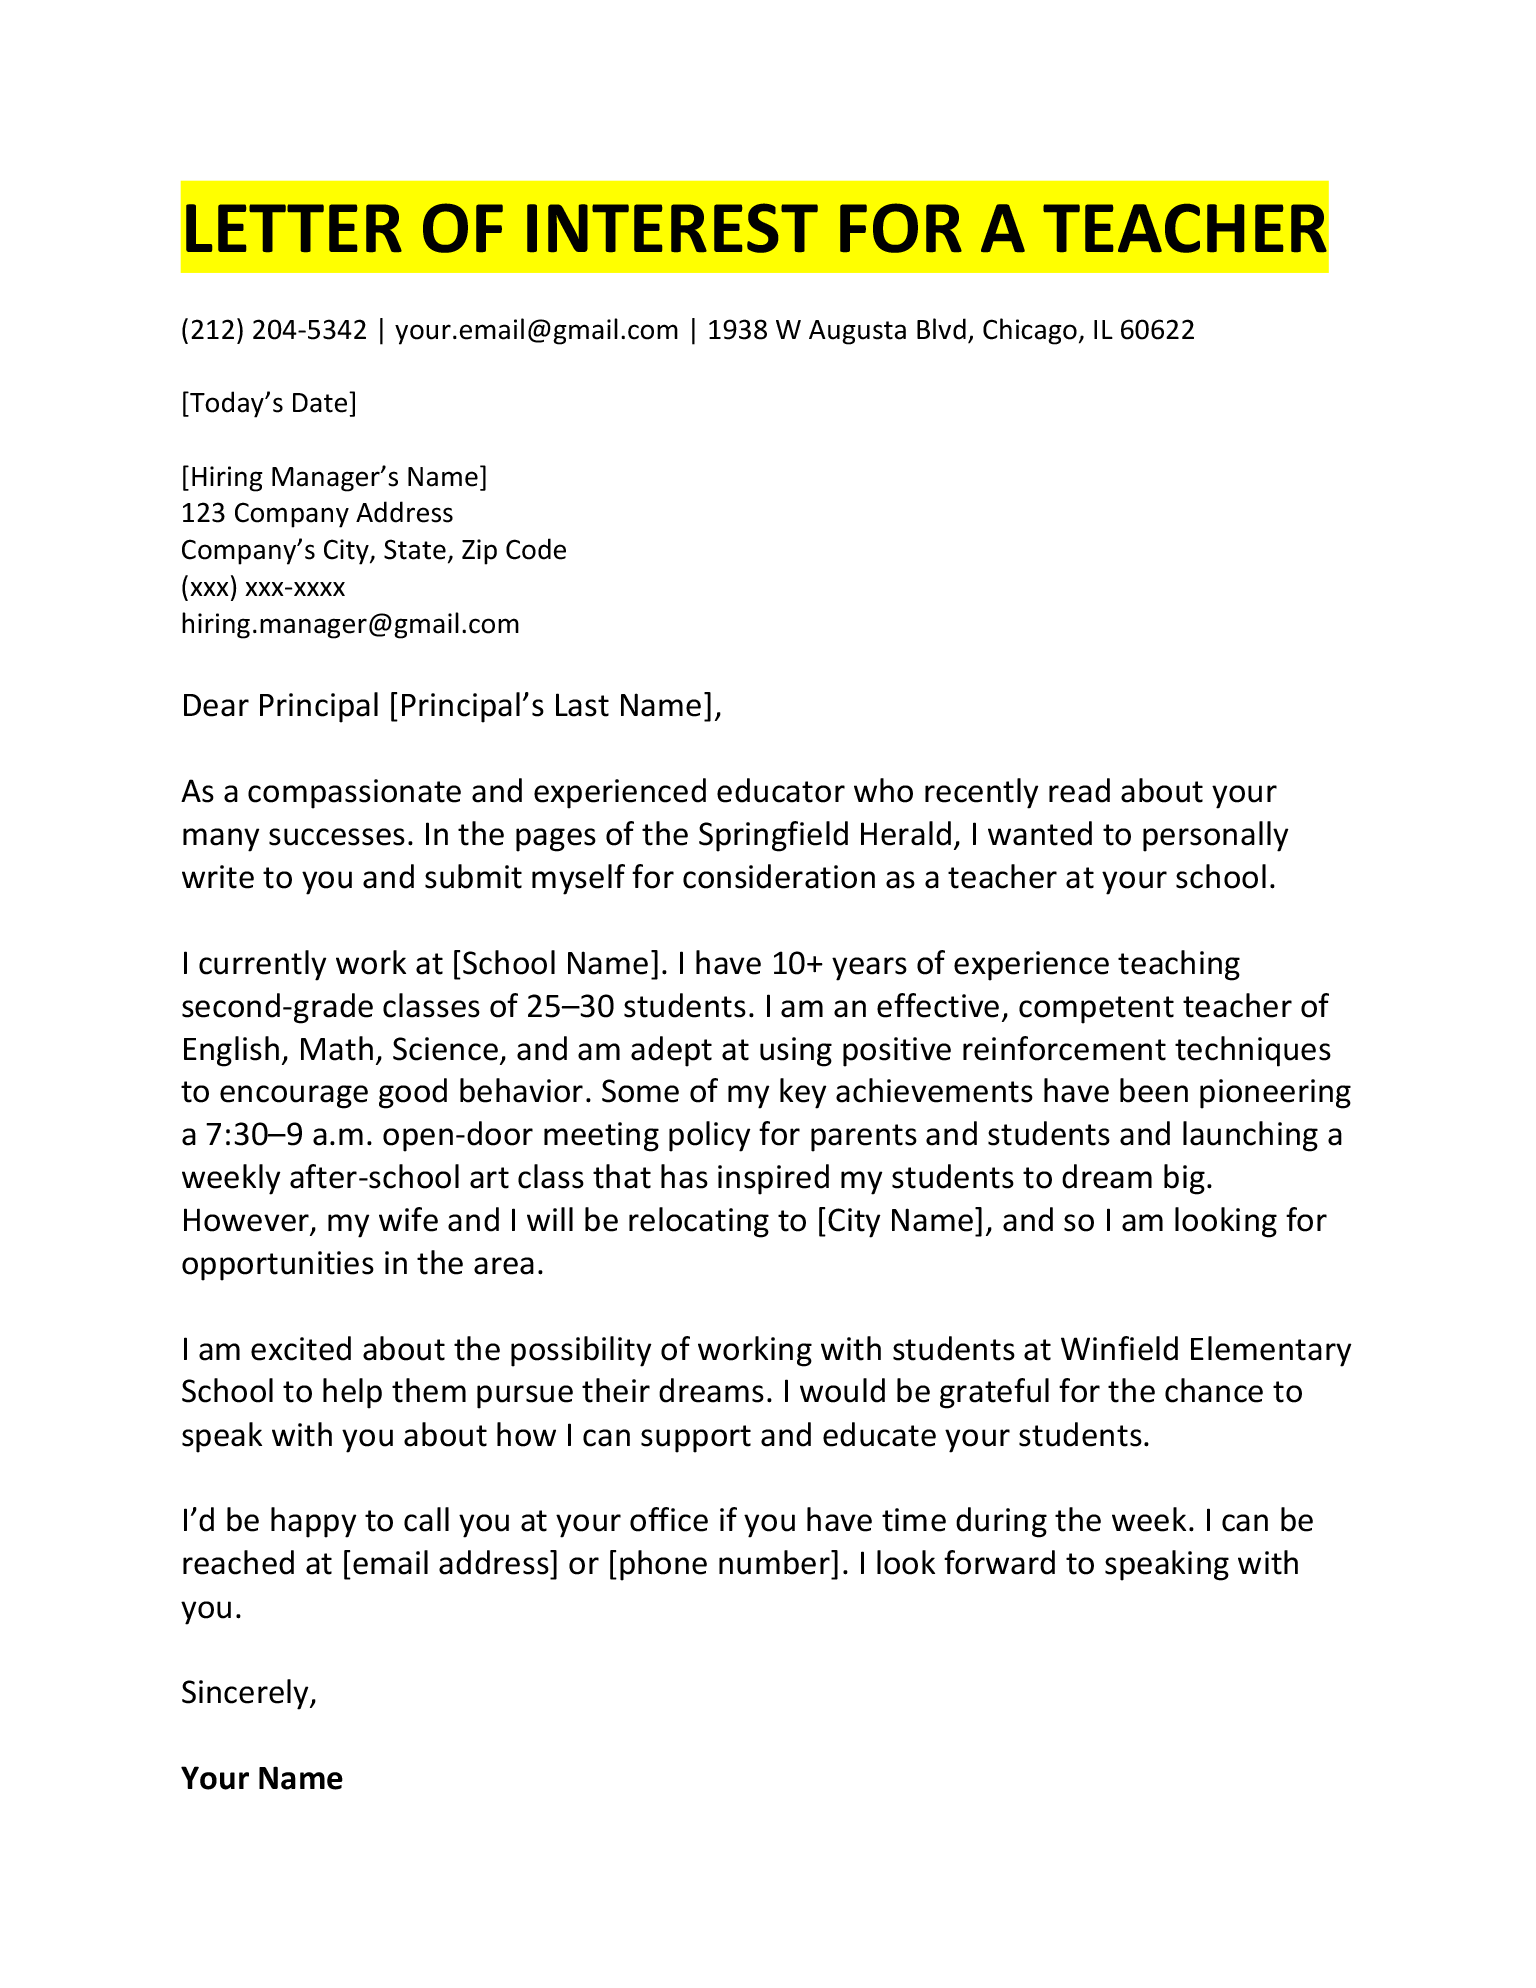 Example of a letter of interest for a teacher.